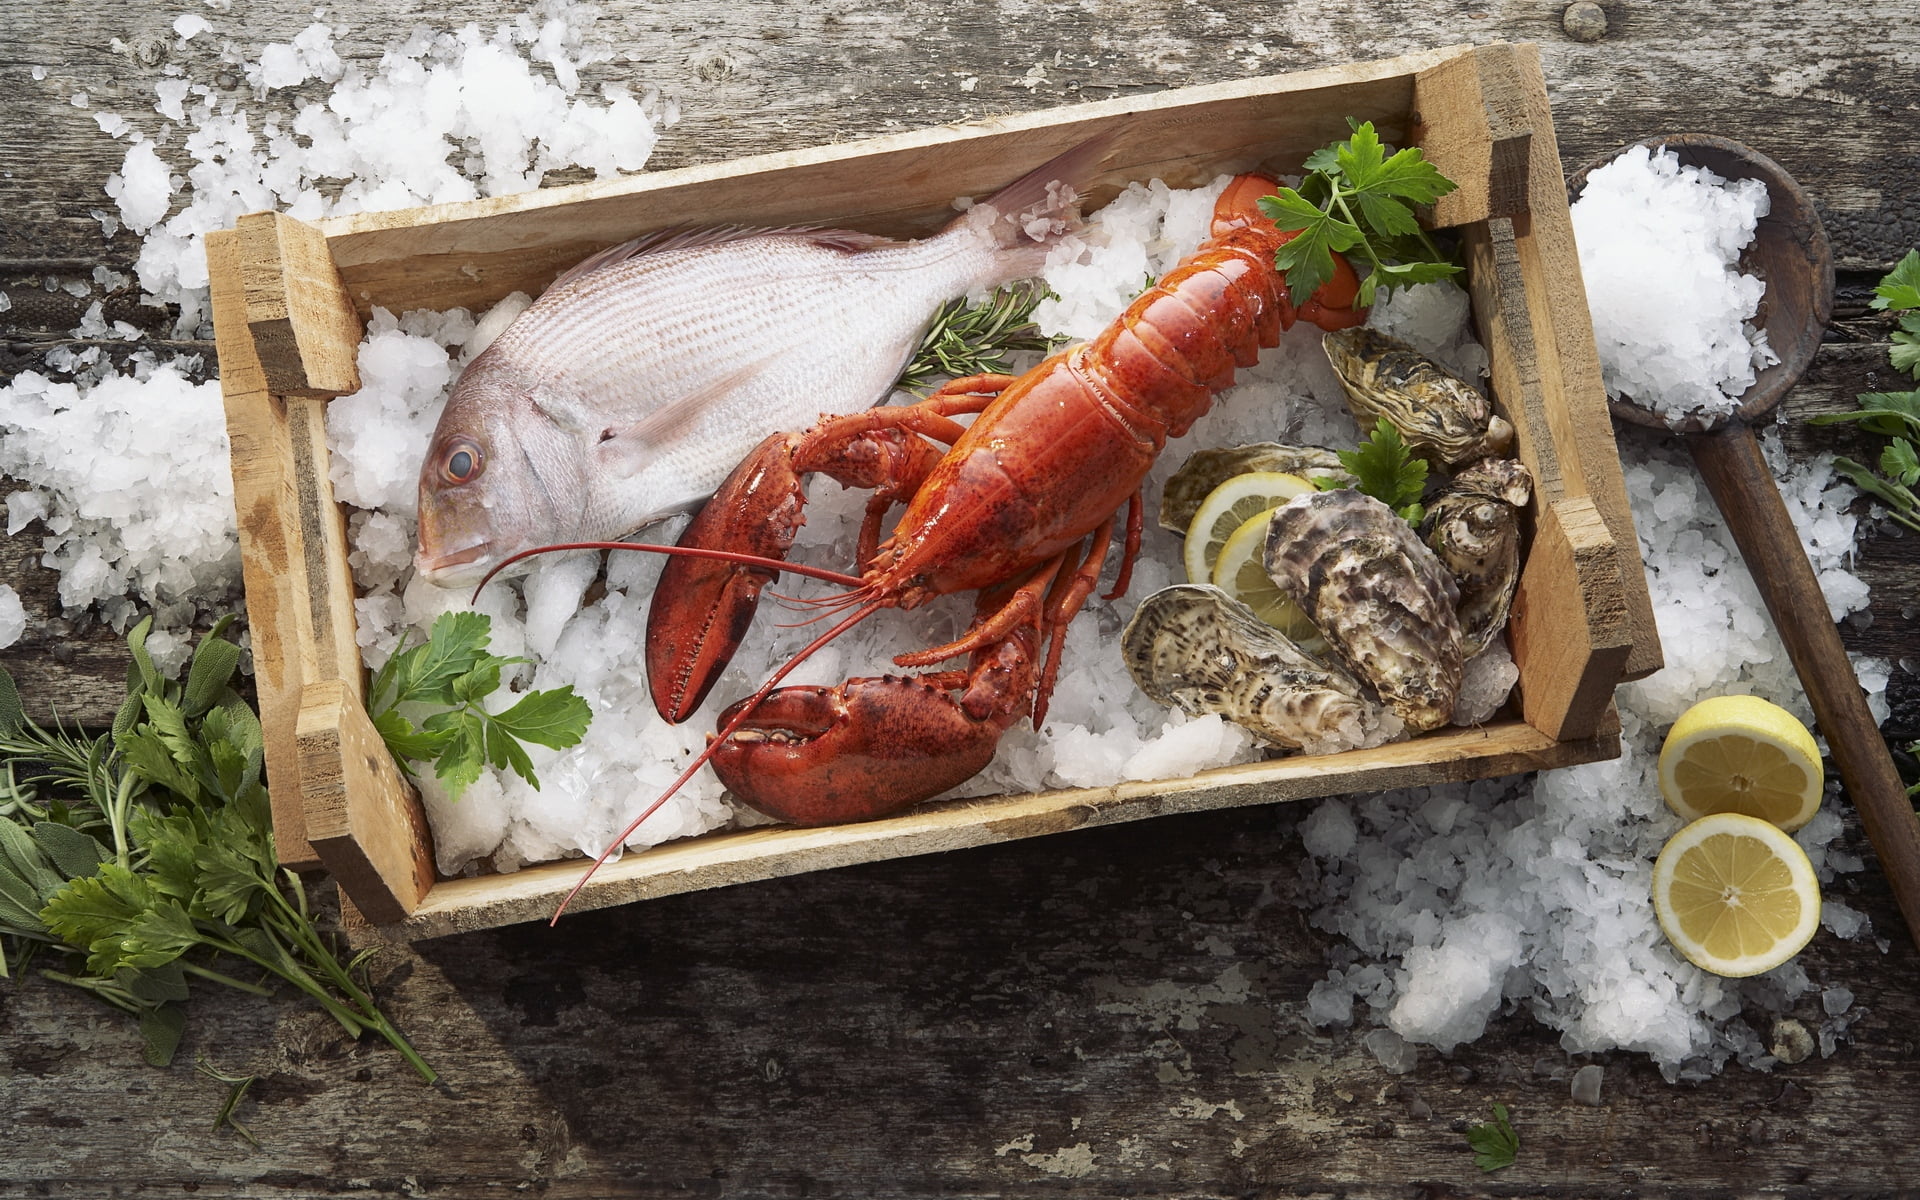 crayfish and gray fish, lobster, mussels, ice, seafood, box, freshness